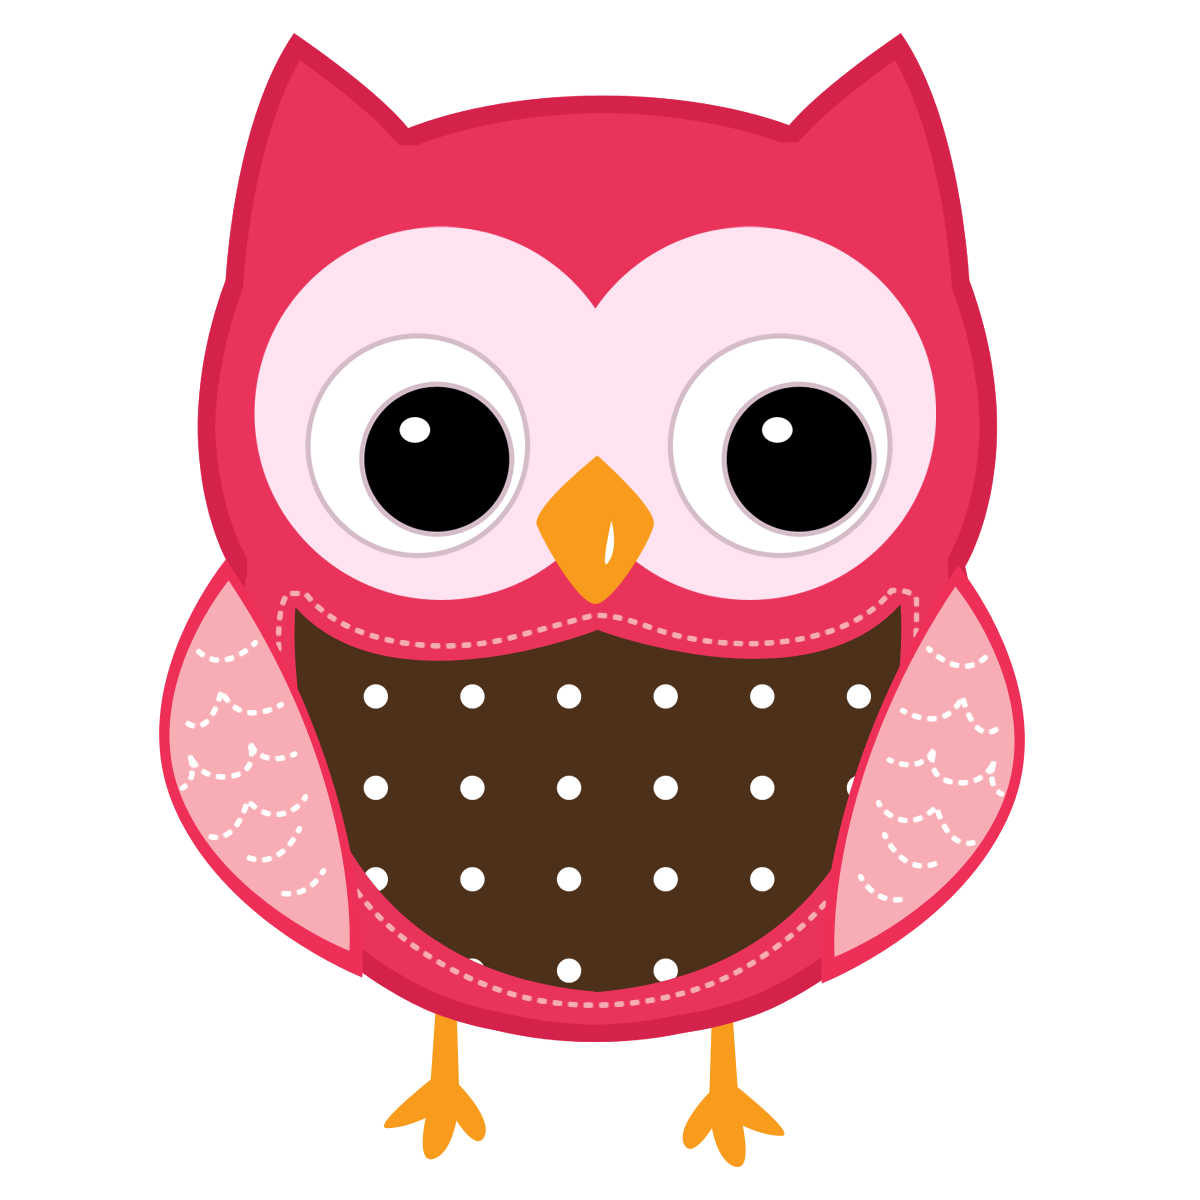 Blue And Brown Owl Clip Art I